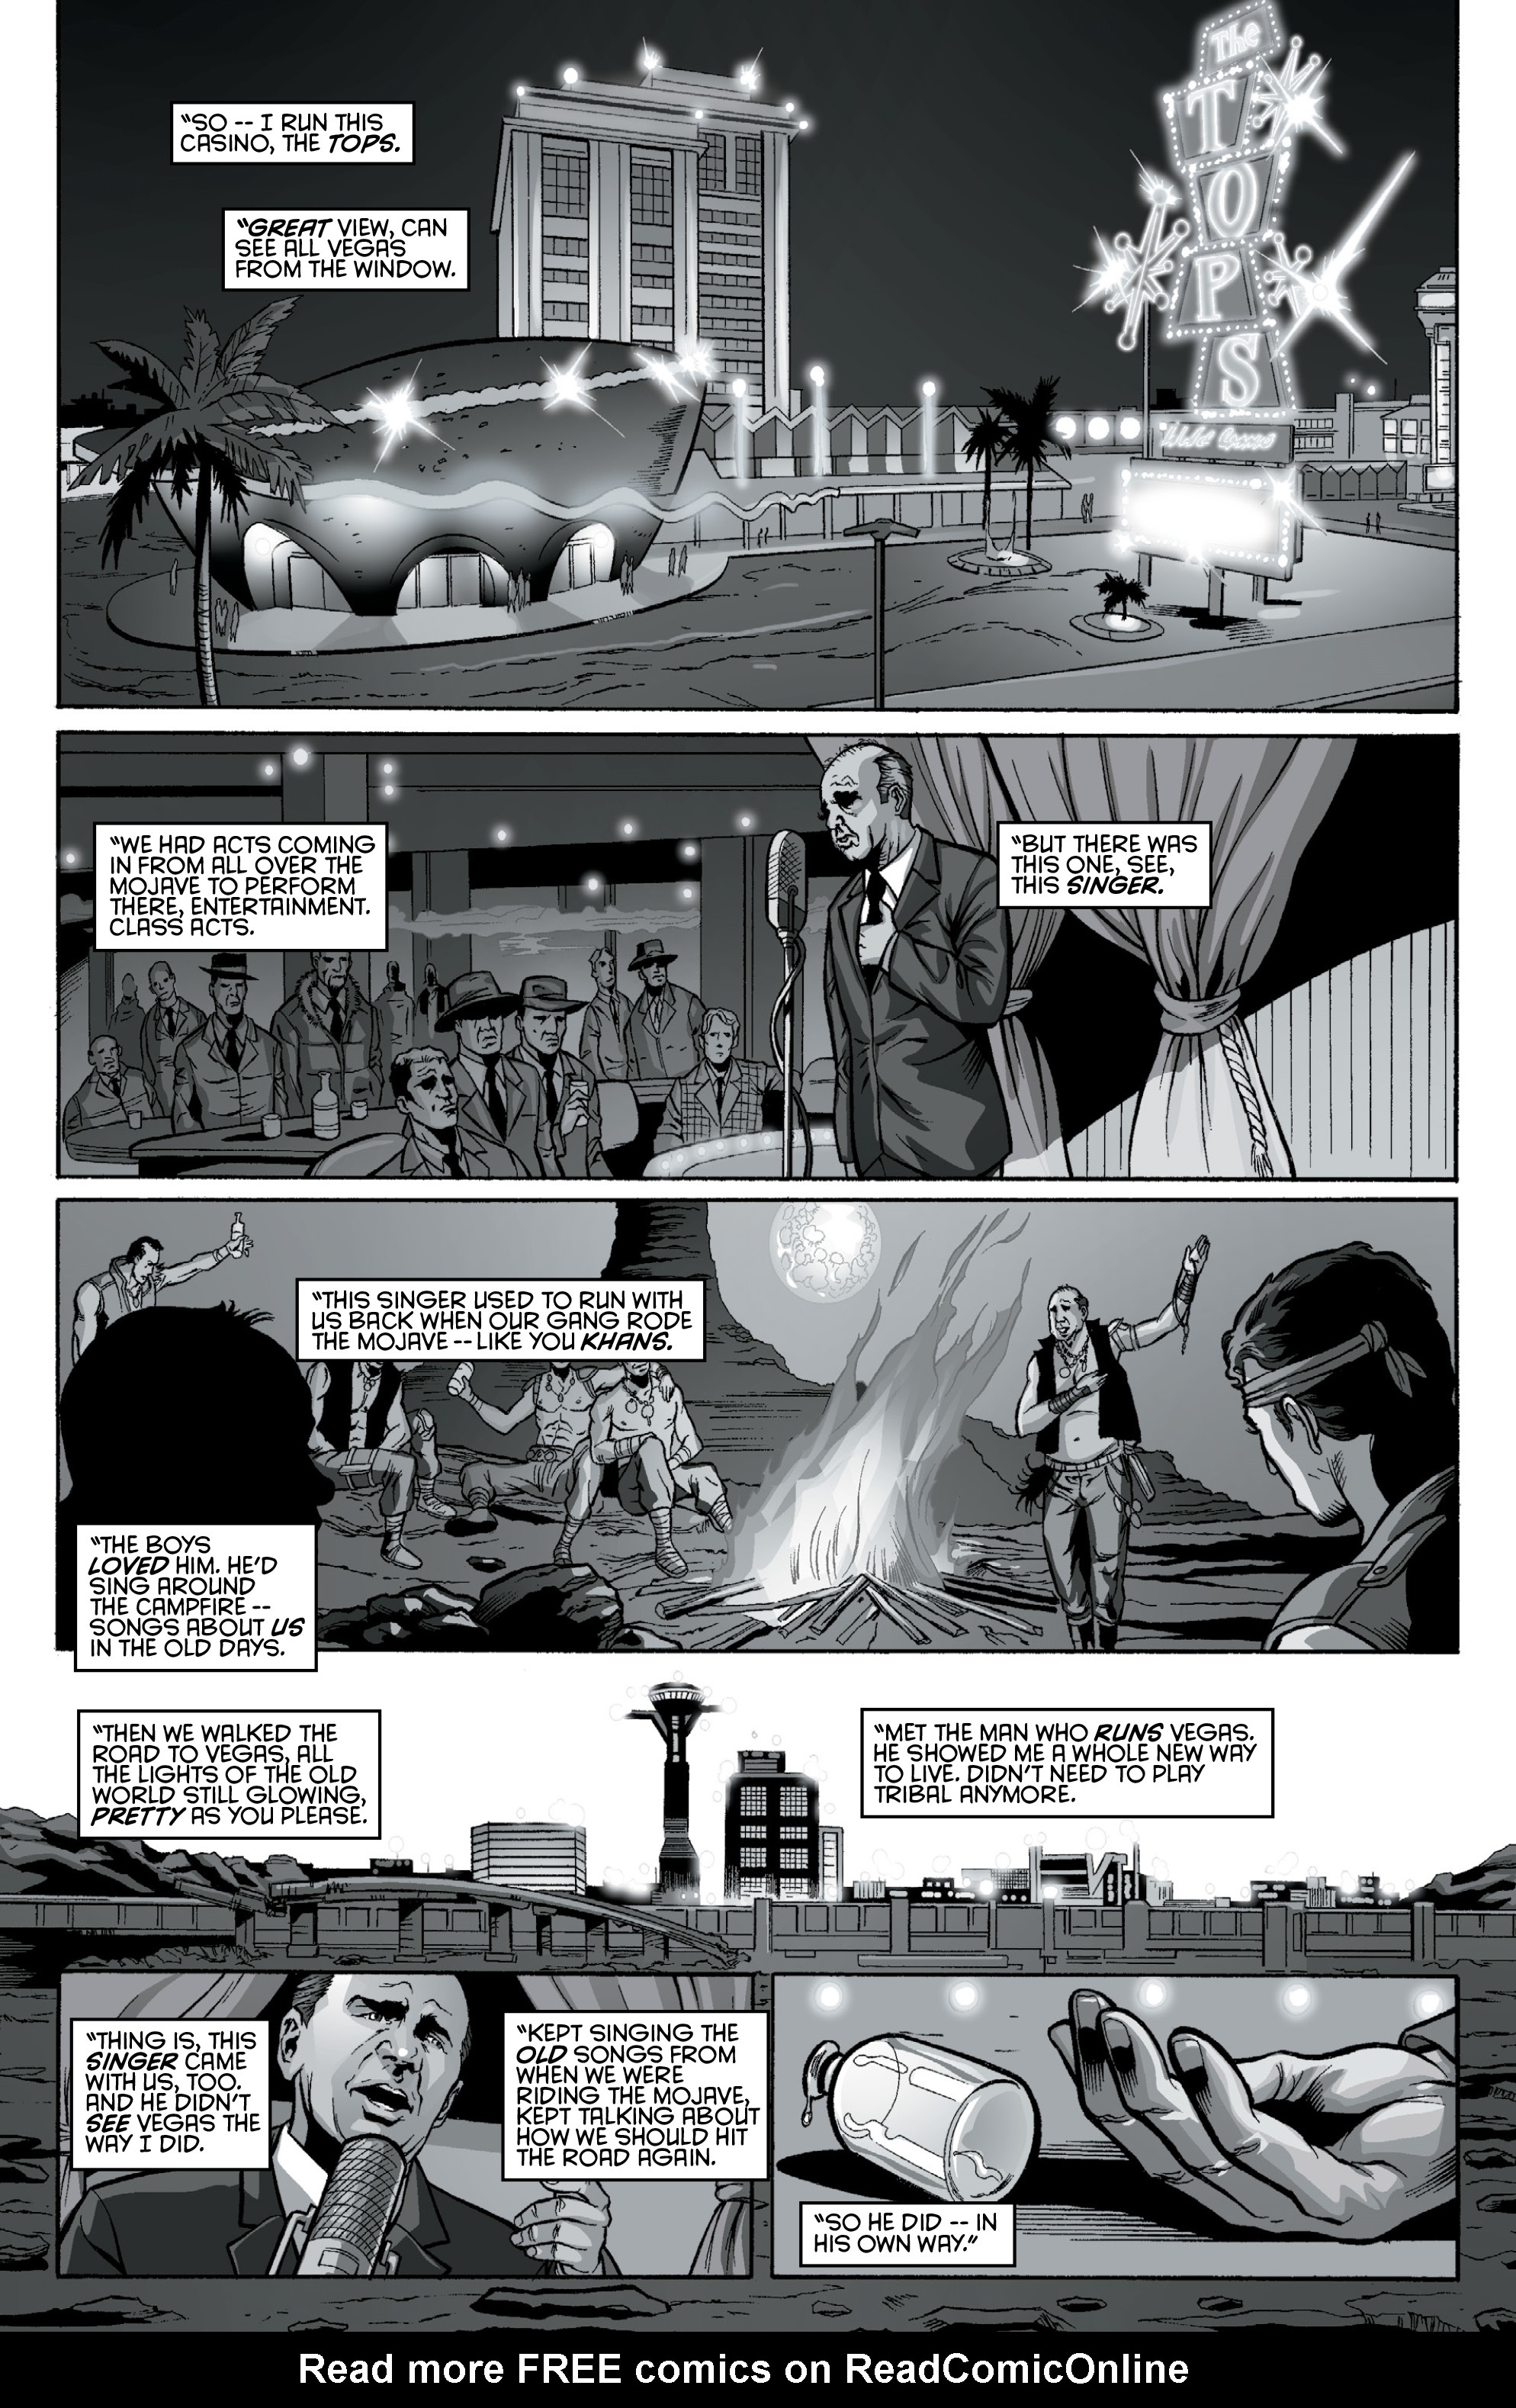 Read online Fallout: New Vegas-All Roads comic -  Issue # Full - 39